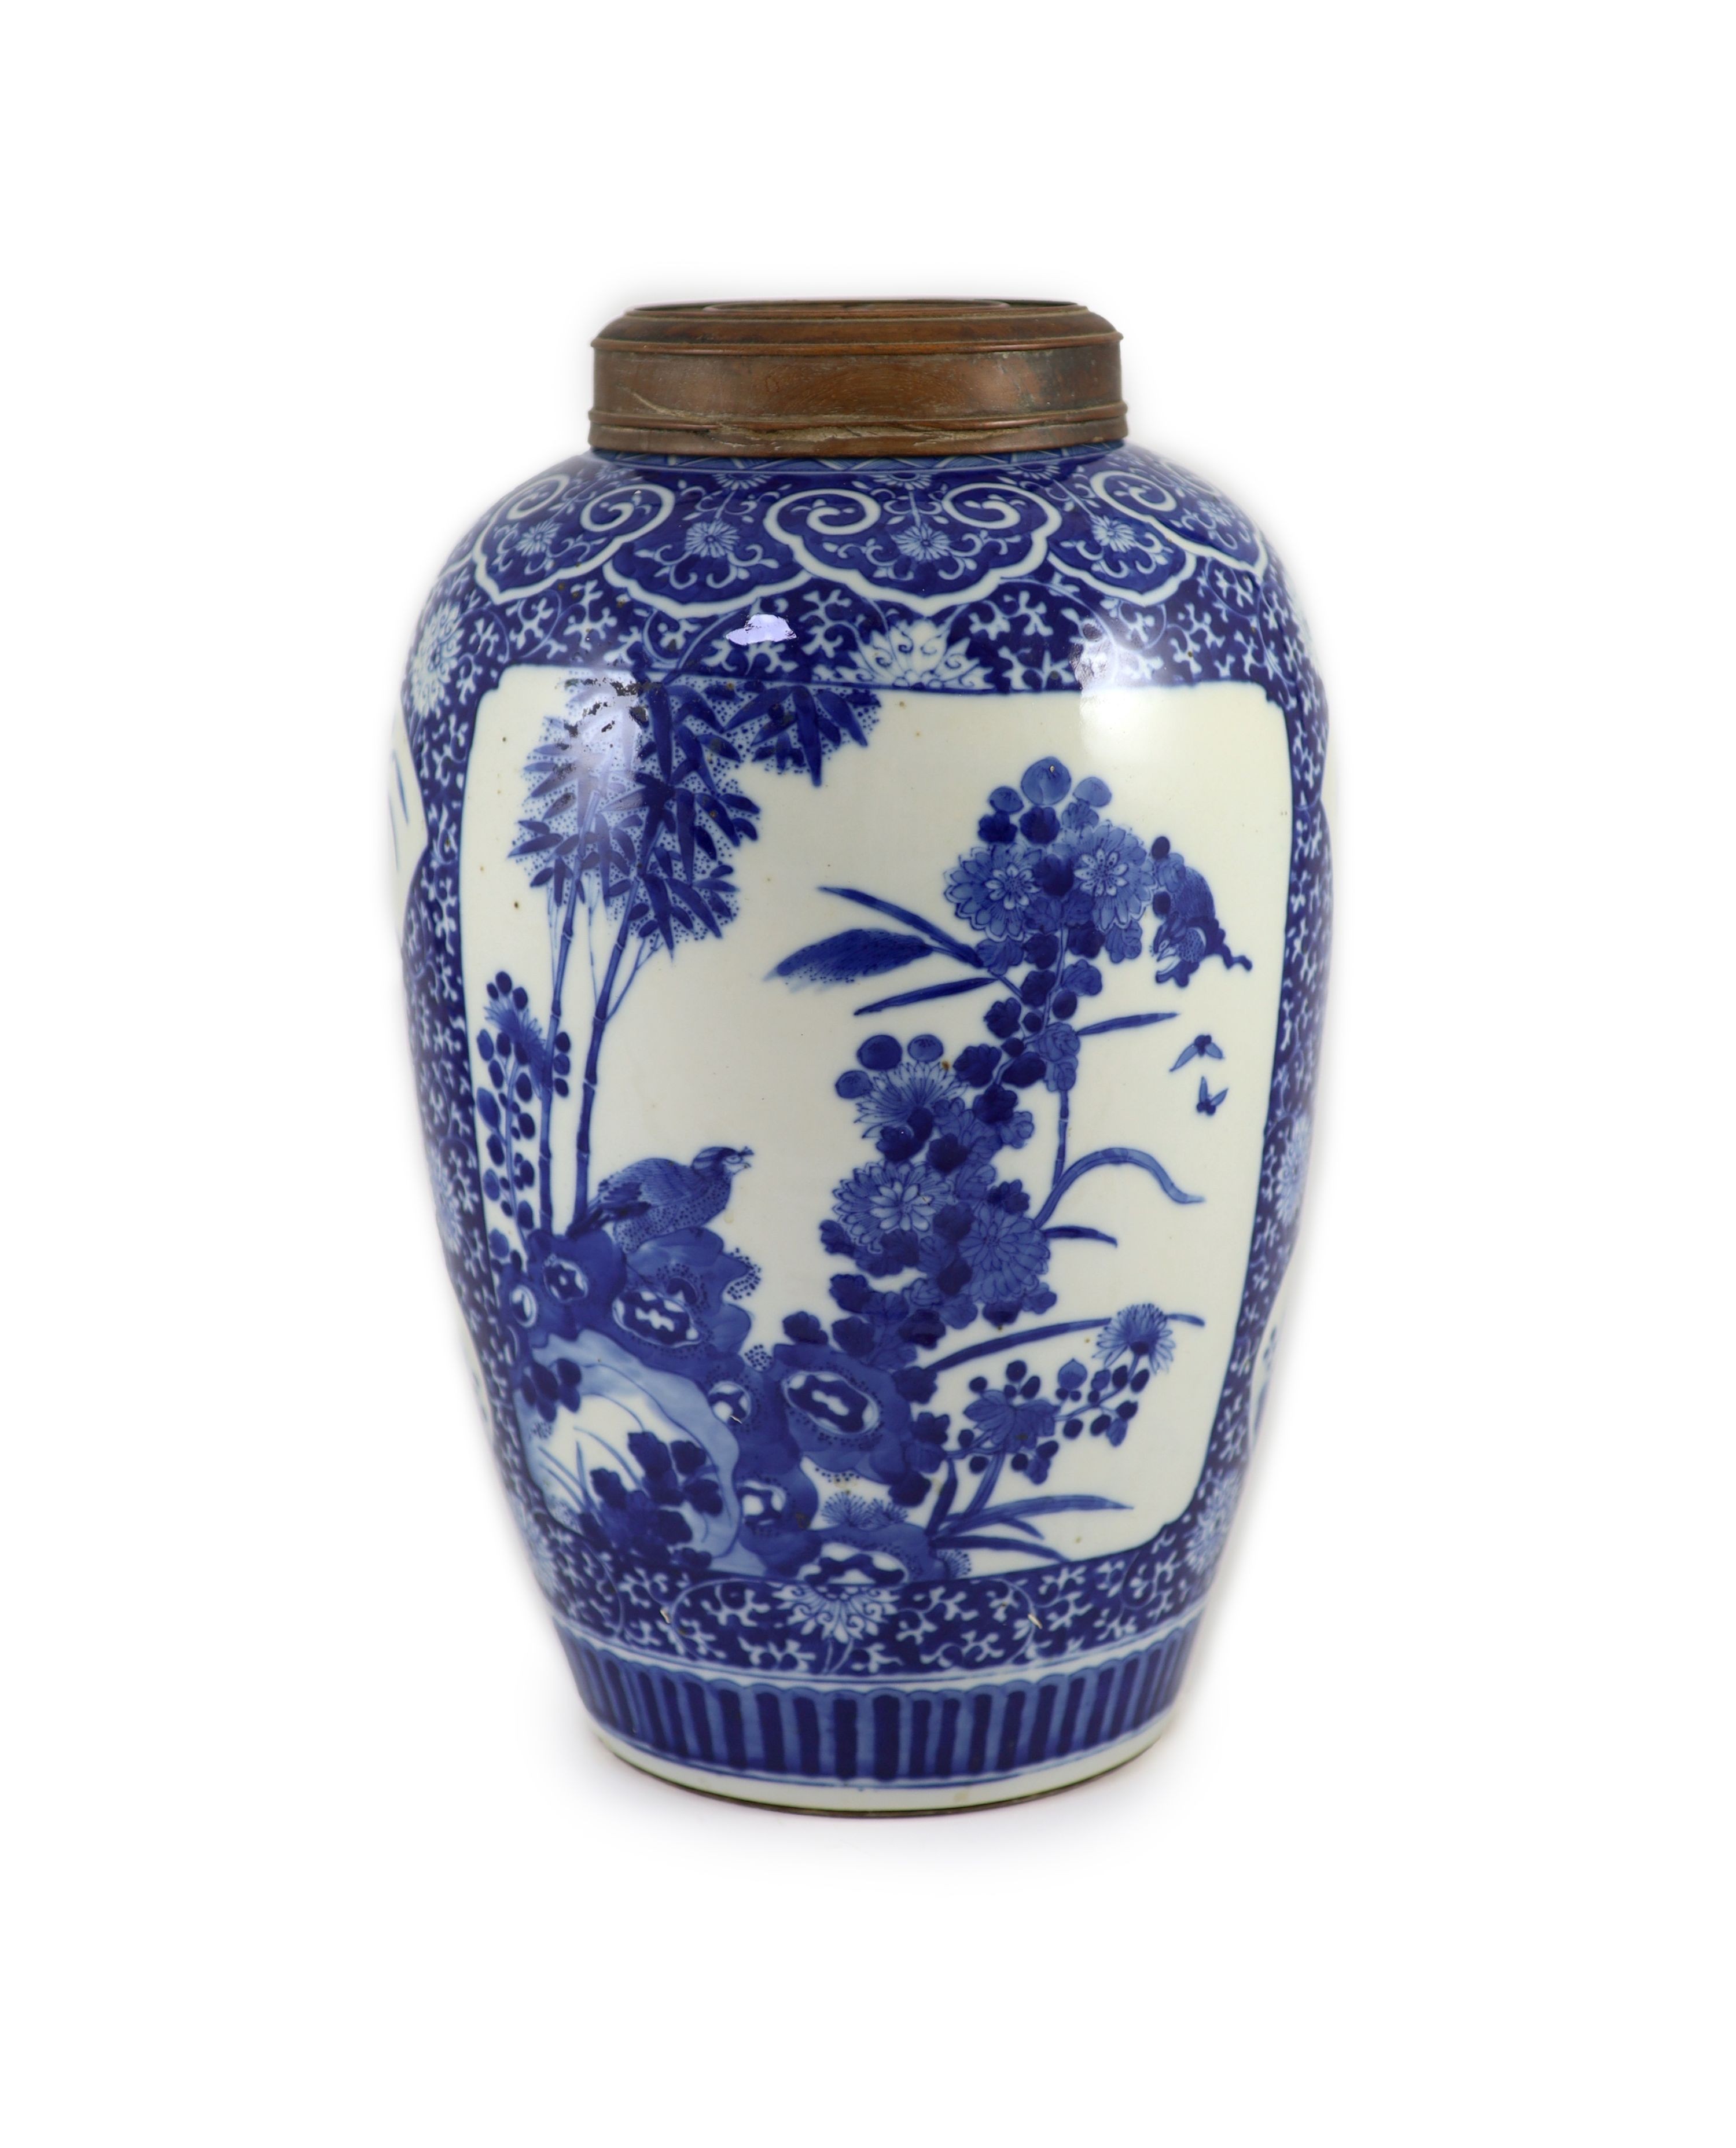 A large Chinese blue and white ovoid jar, 19th century, 35cm high, wood cover